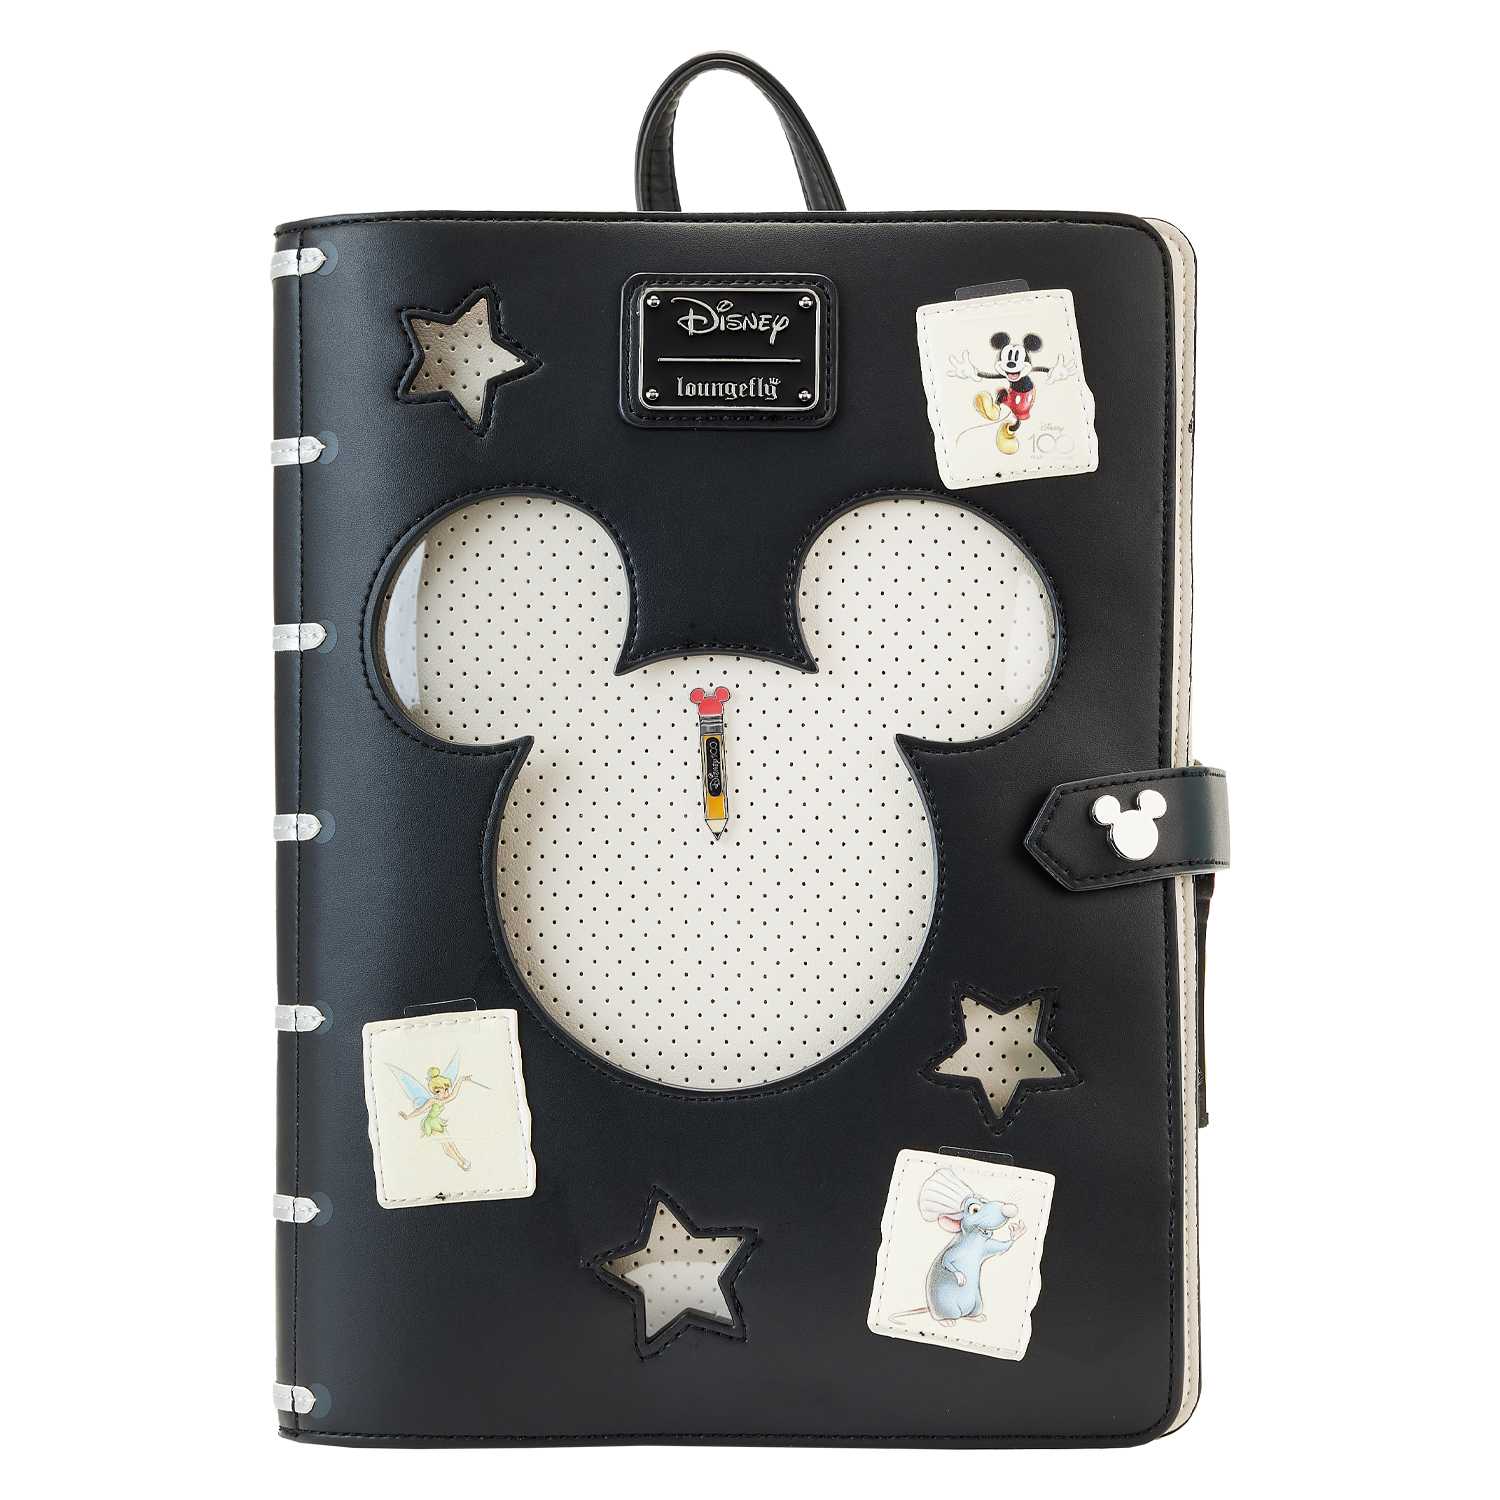 Loungefly Mickey 100th pins